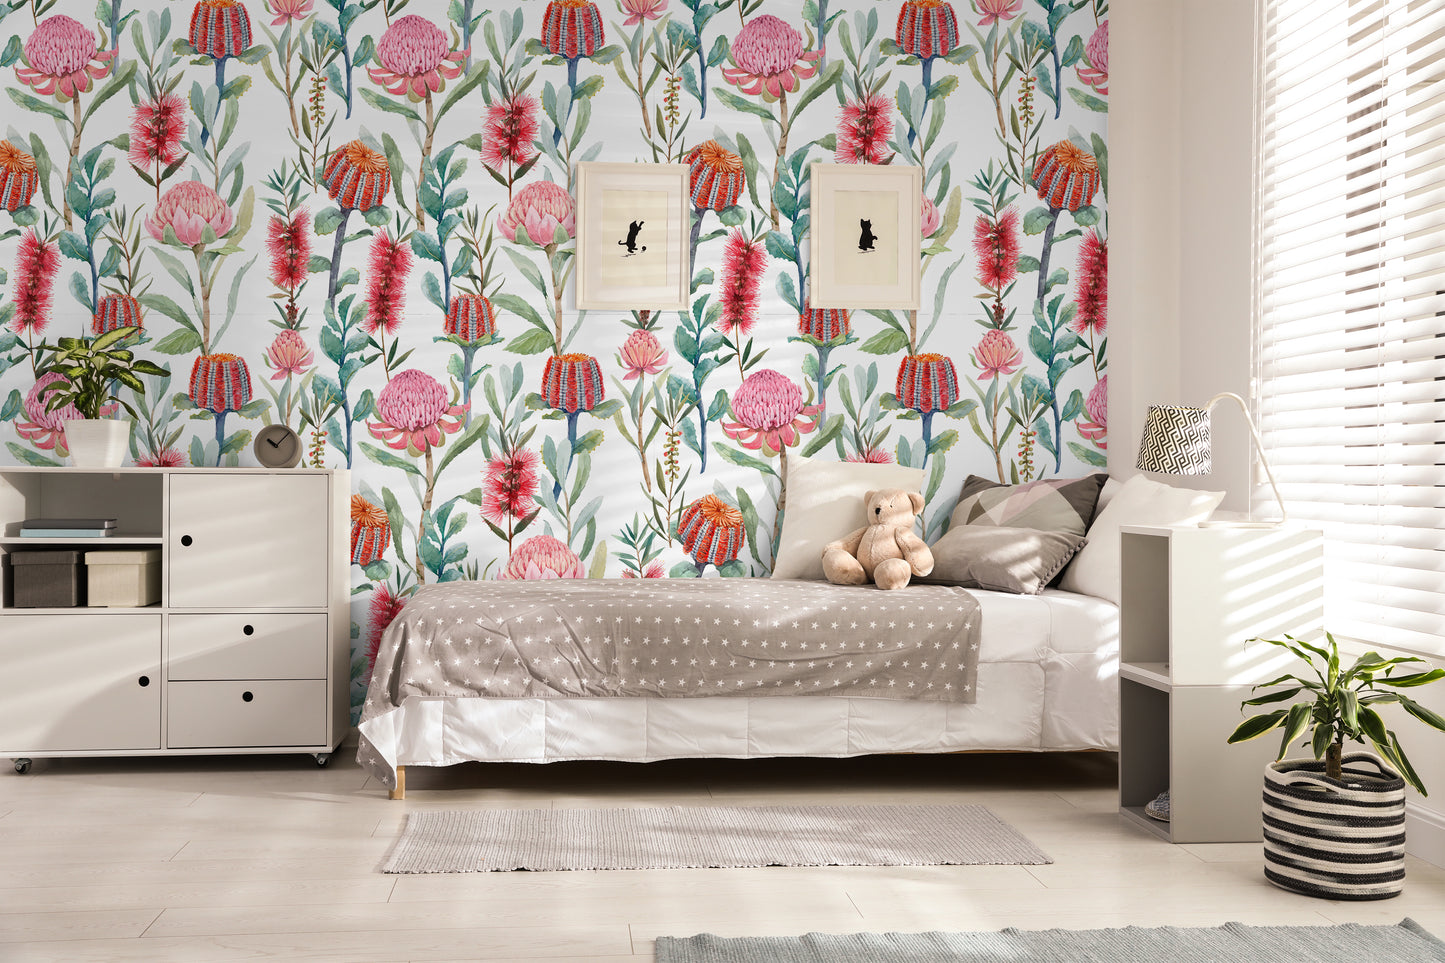 Wildflower removable peel and stick wallpaper in bedroom